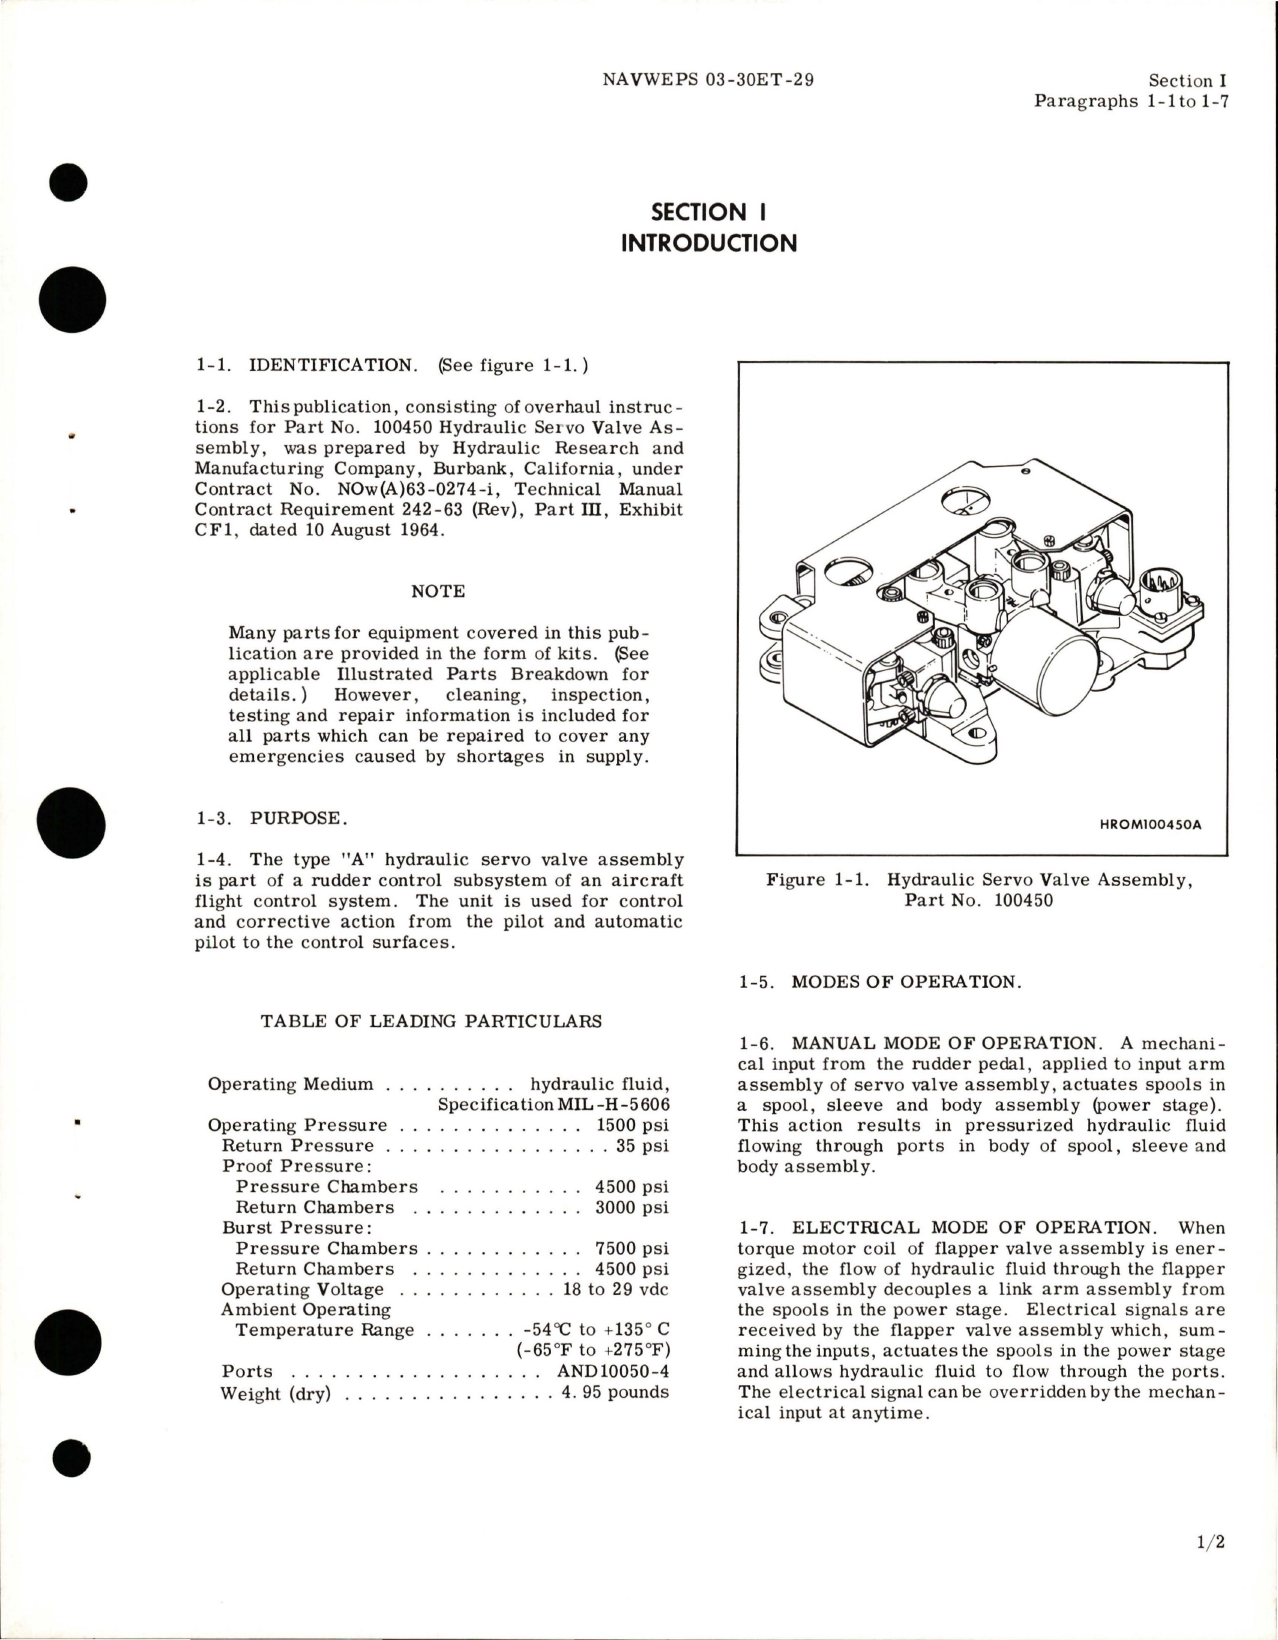 Sample page 5 from AirCorps Library document: Overhaul Instructions for Hydraulic Servo Valve Assembly - Part 100450 